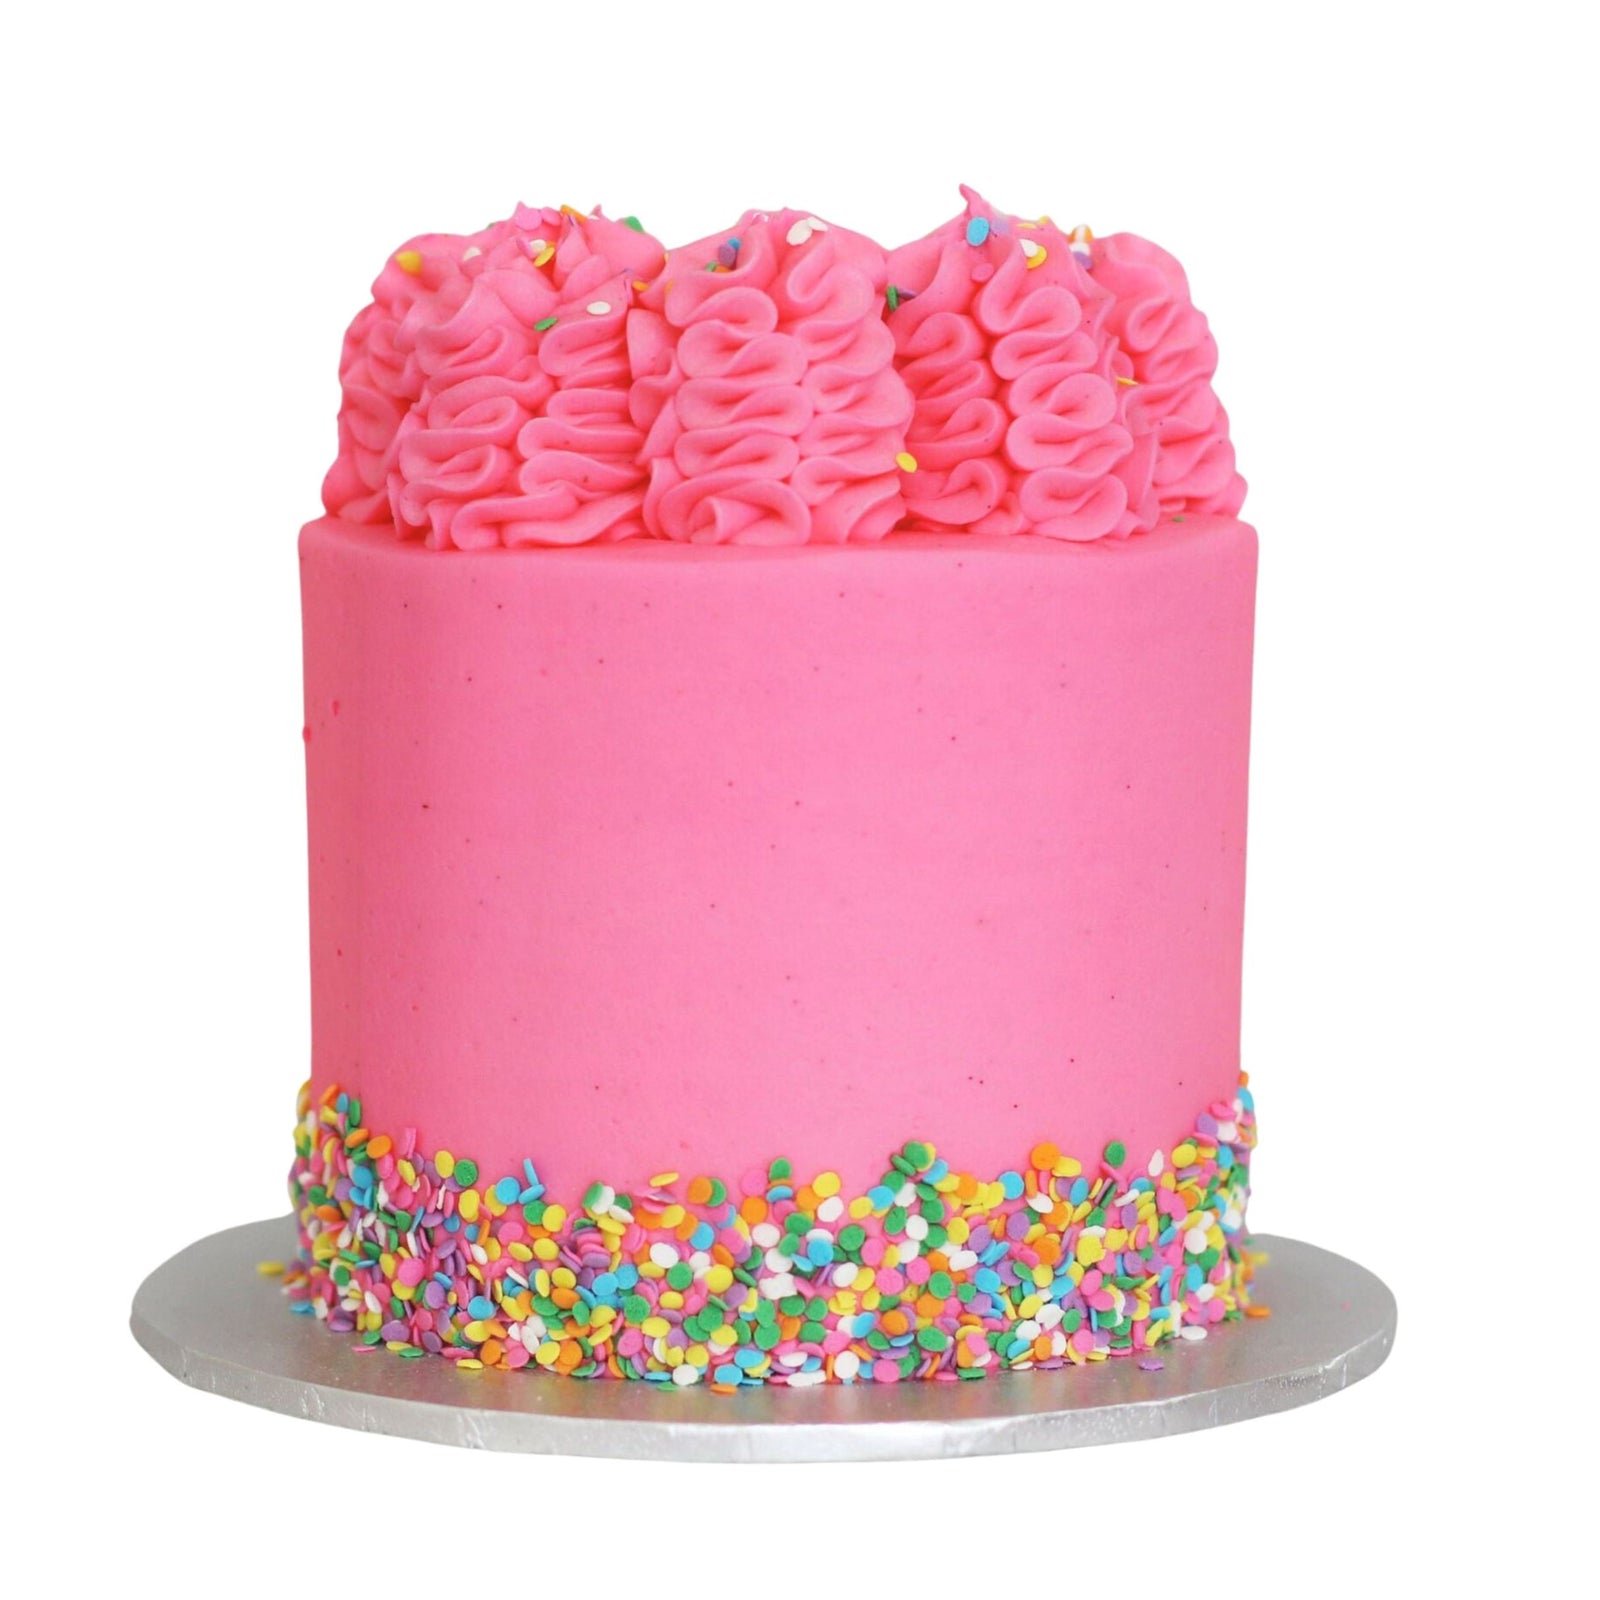 Girly Birthday Cakes | London | Anges de Sucre